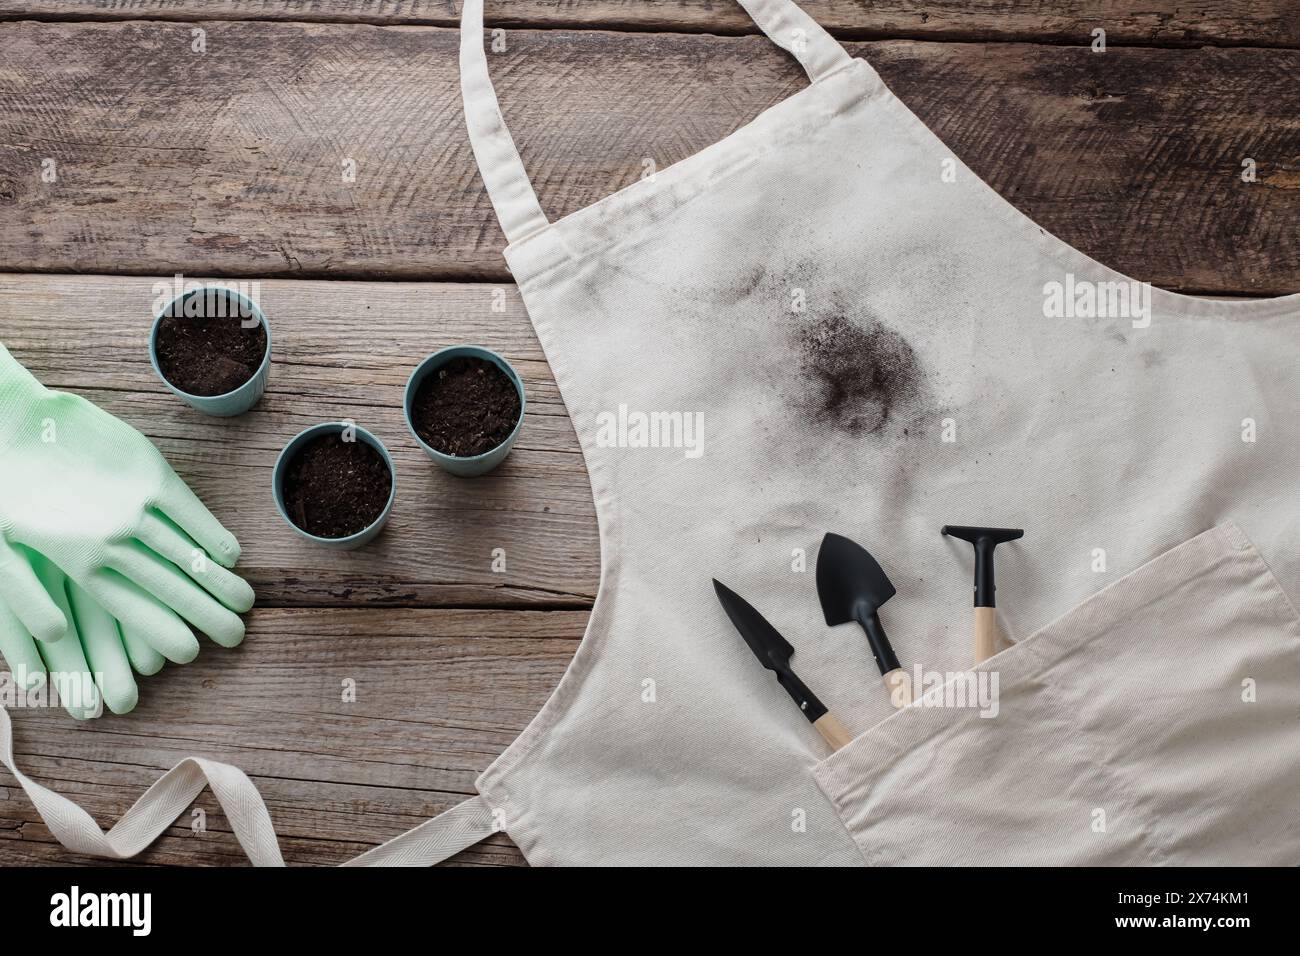 Transplanting home plant. Dirty soil stain on the apron. isolated on a wooden background. top view Stock Photo